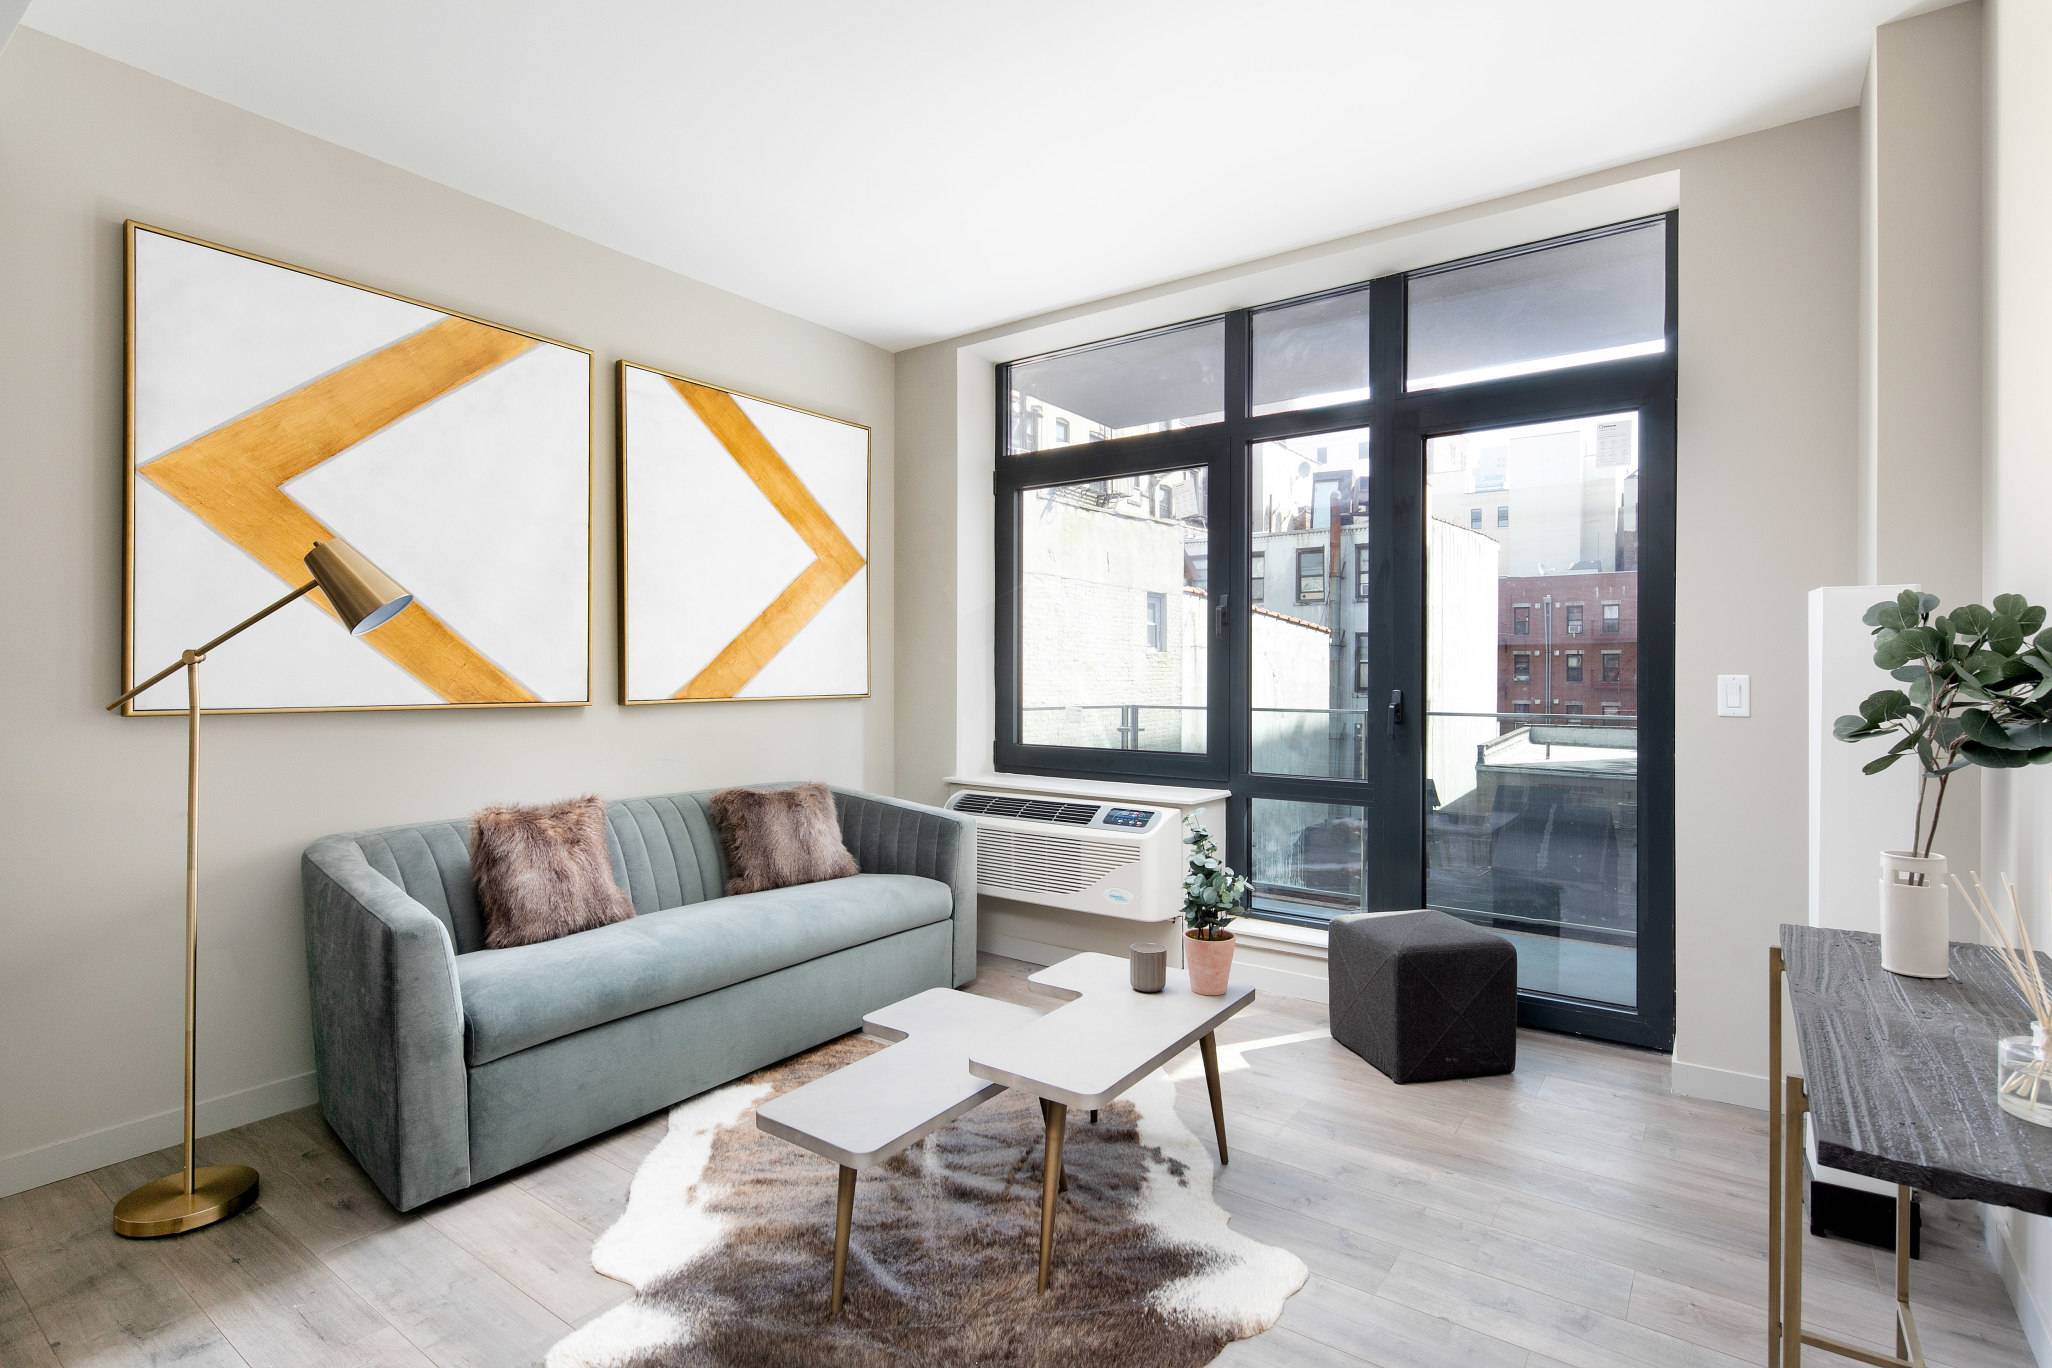 Parioli, the new development at 114 Mulberry Street that is being built in collaboration with Fischer Makooi Architects, is a mixed use building with 23 residential units ranging from 467 ...